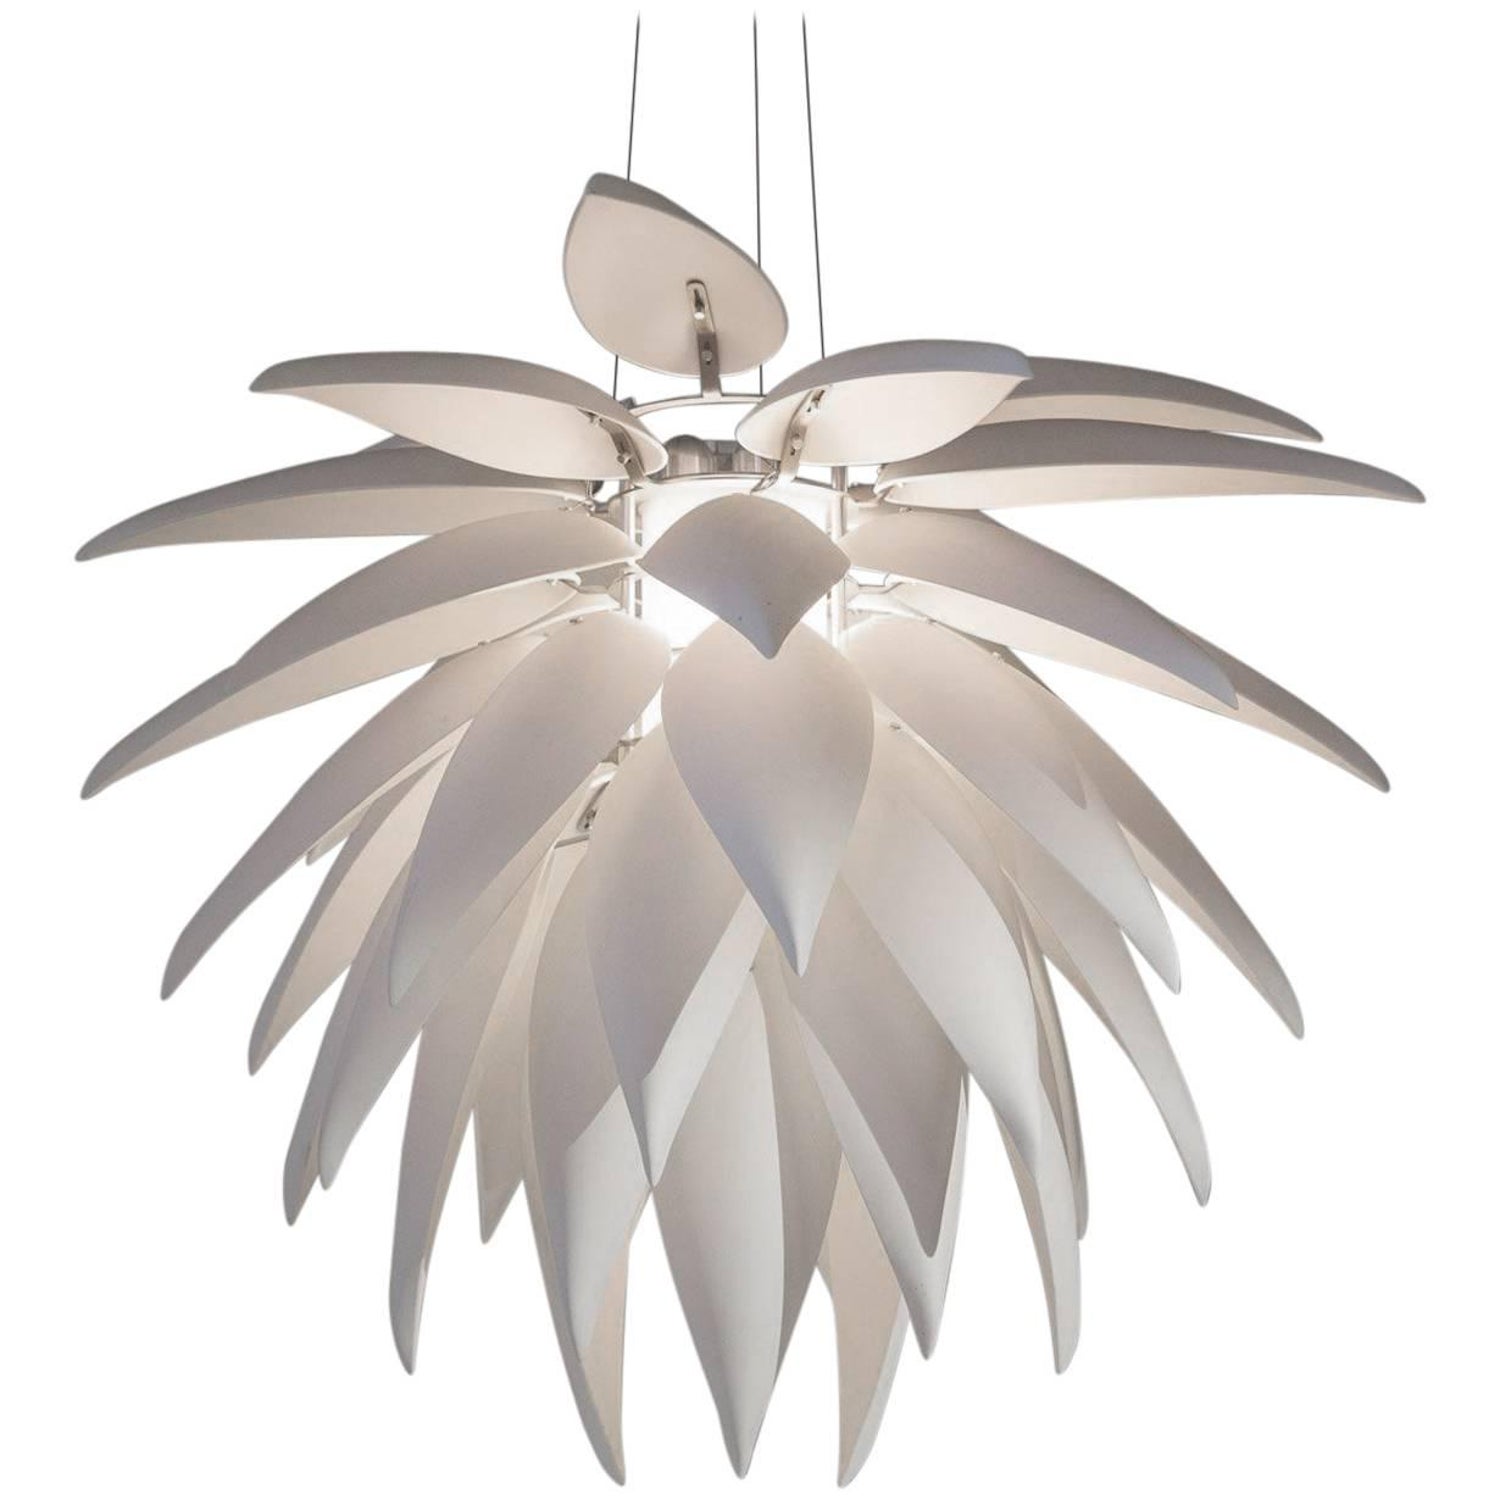 Jeremy Cole Blossom China Chandelier For Sale at